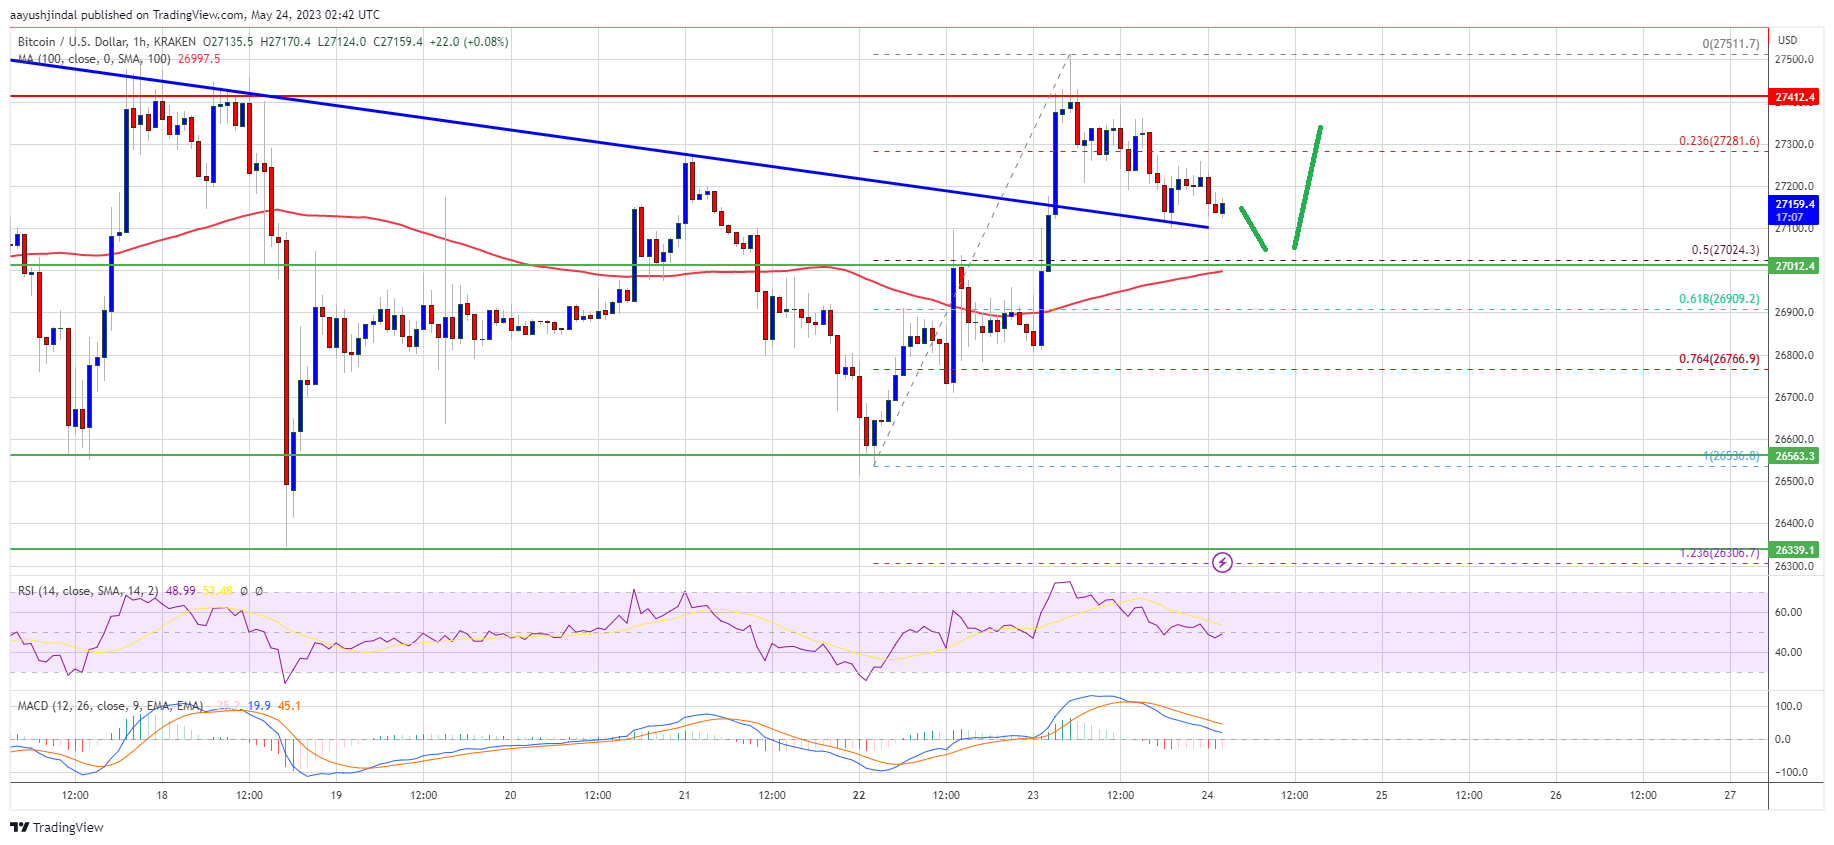 Bitcoin Price Fails Again But This Support Could Spark Fresh Increase